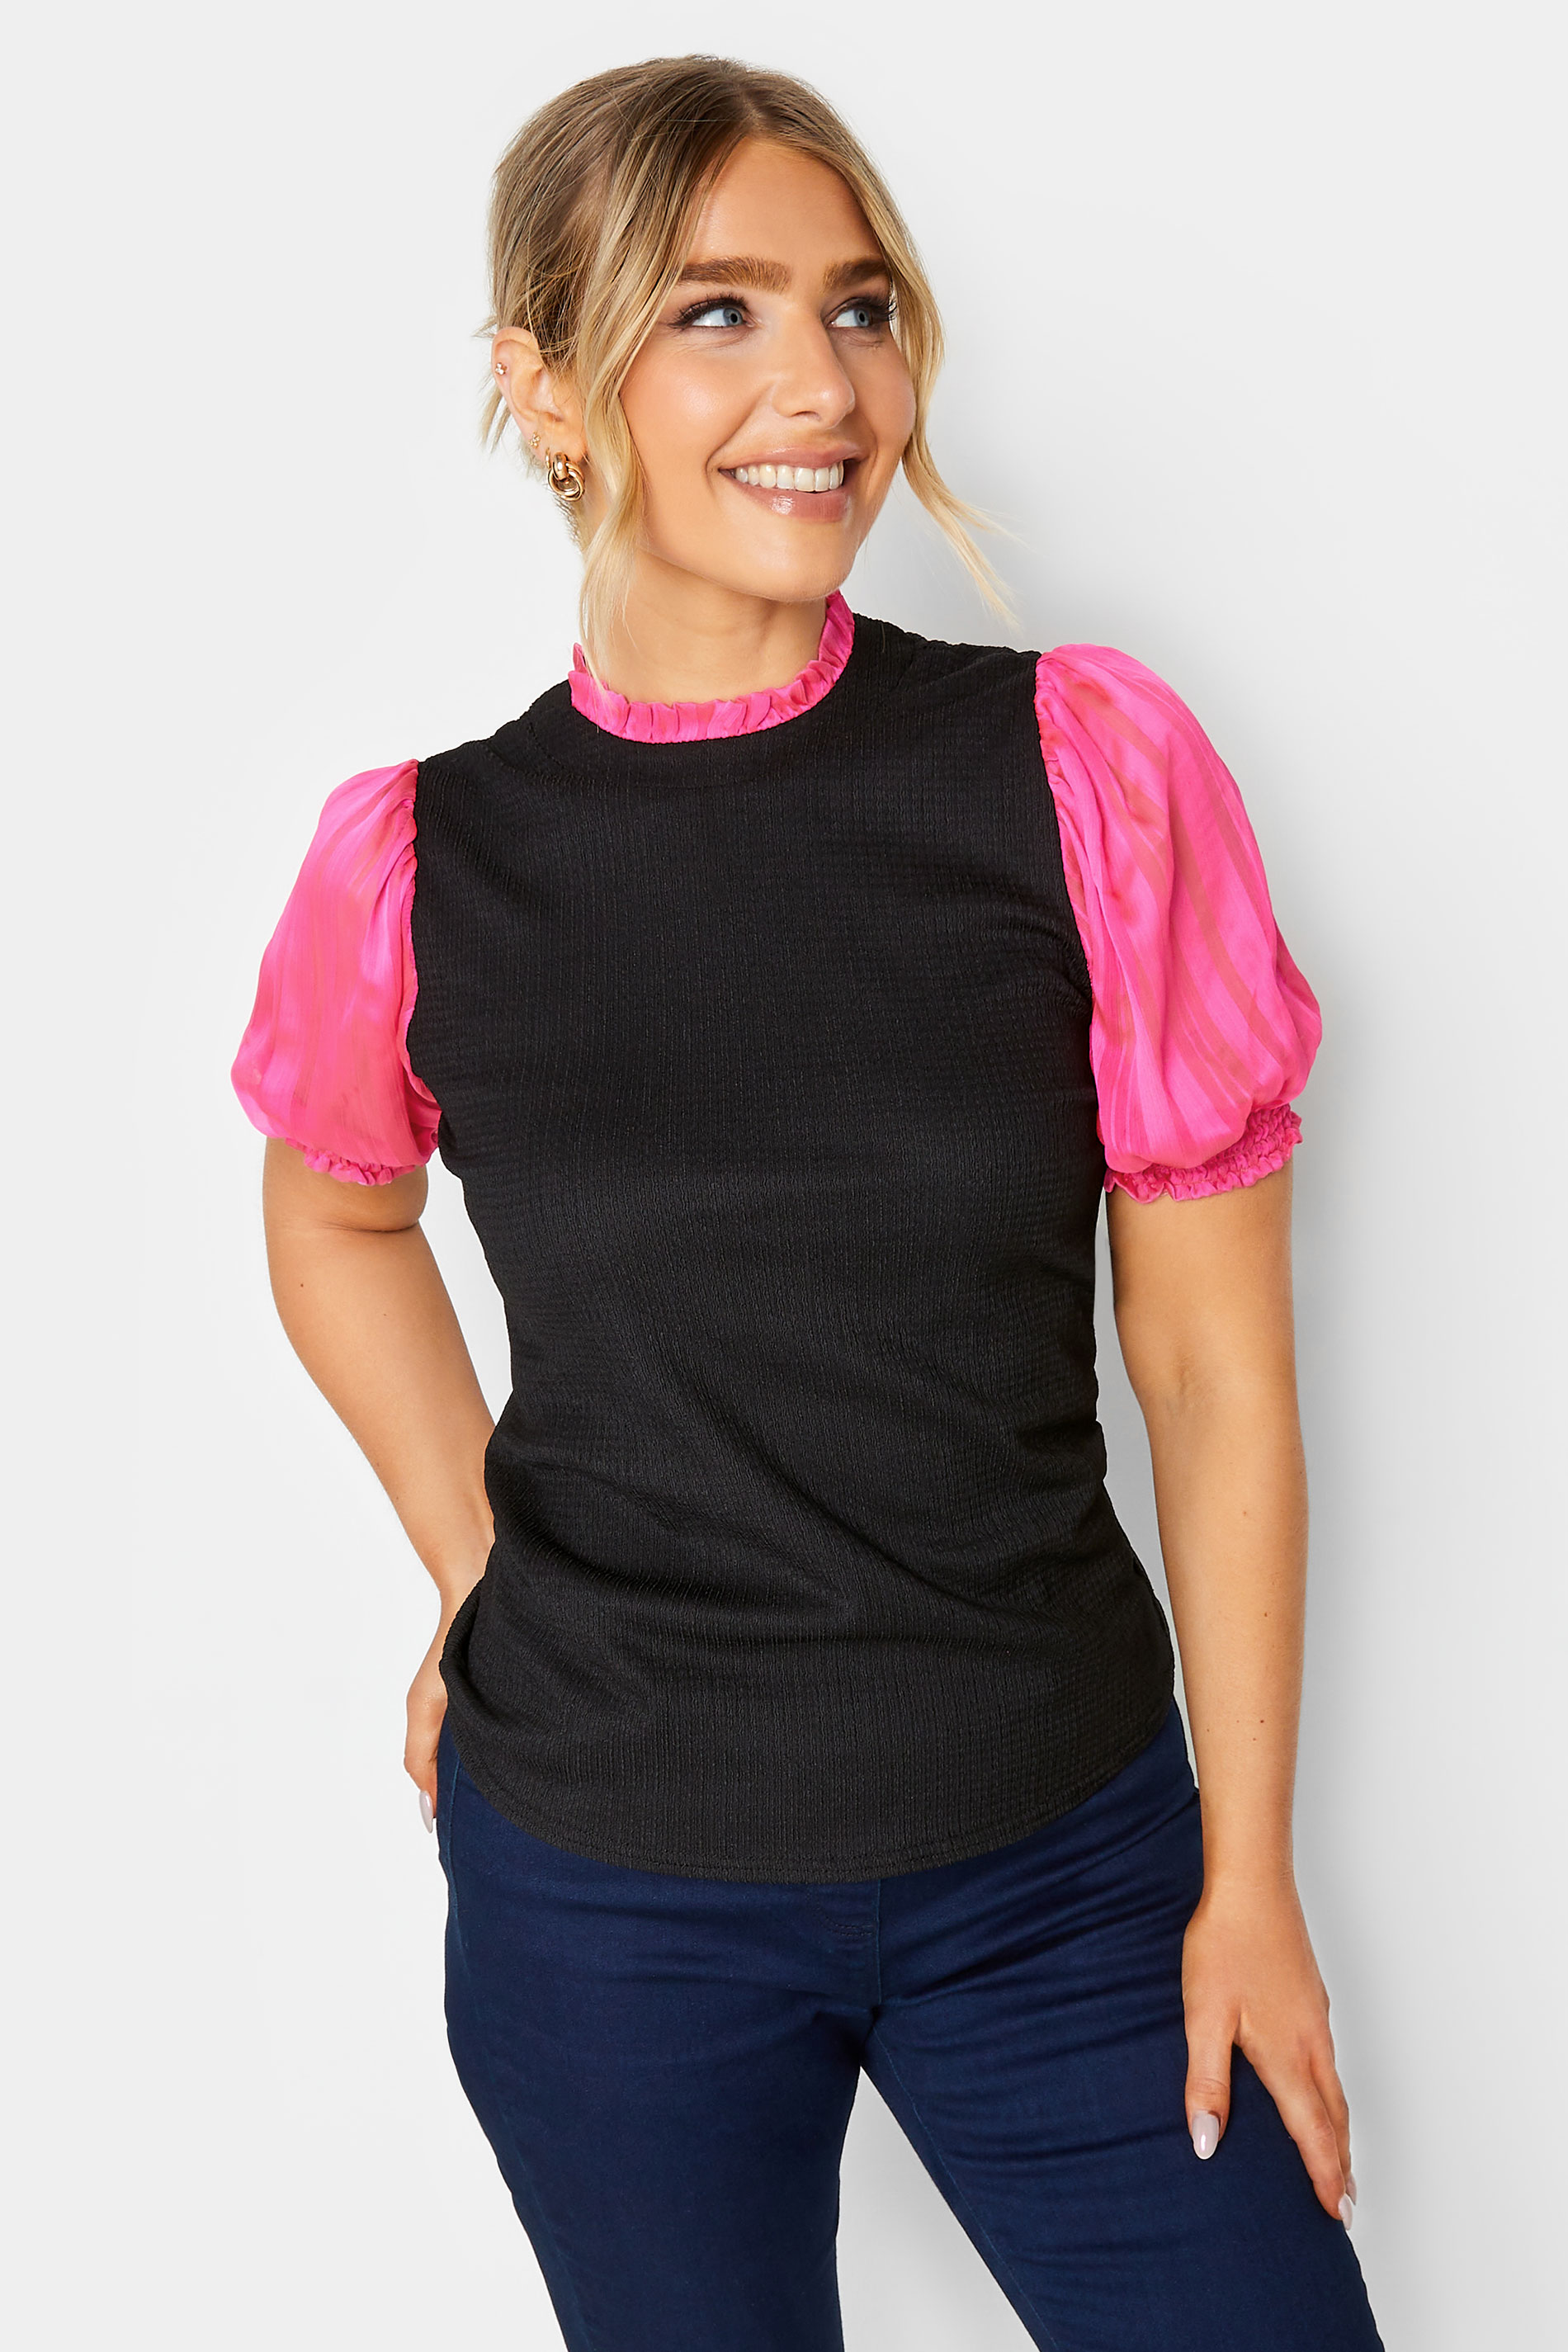 M&Co Black & Pink Contrast Sleeve Blouse | M&Co 1